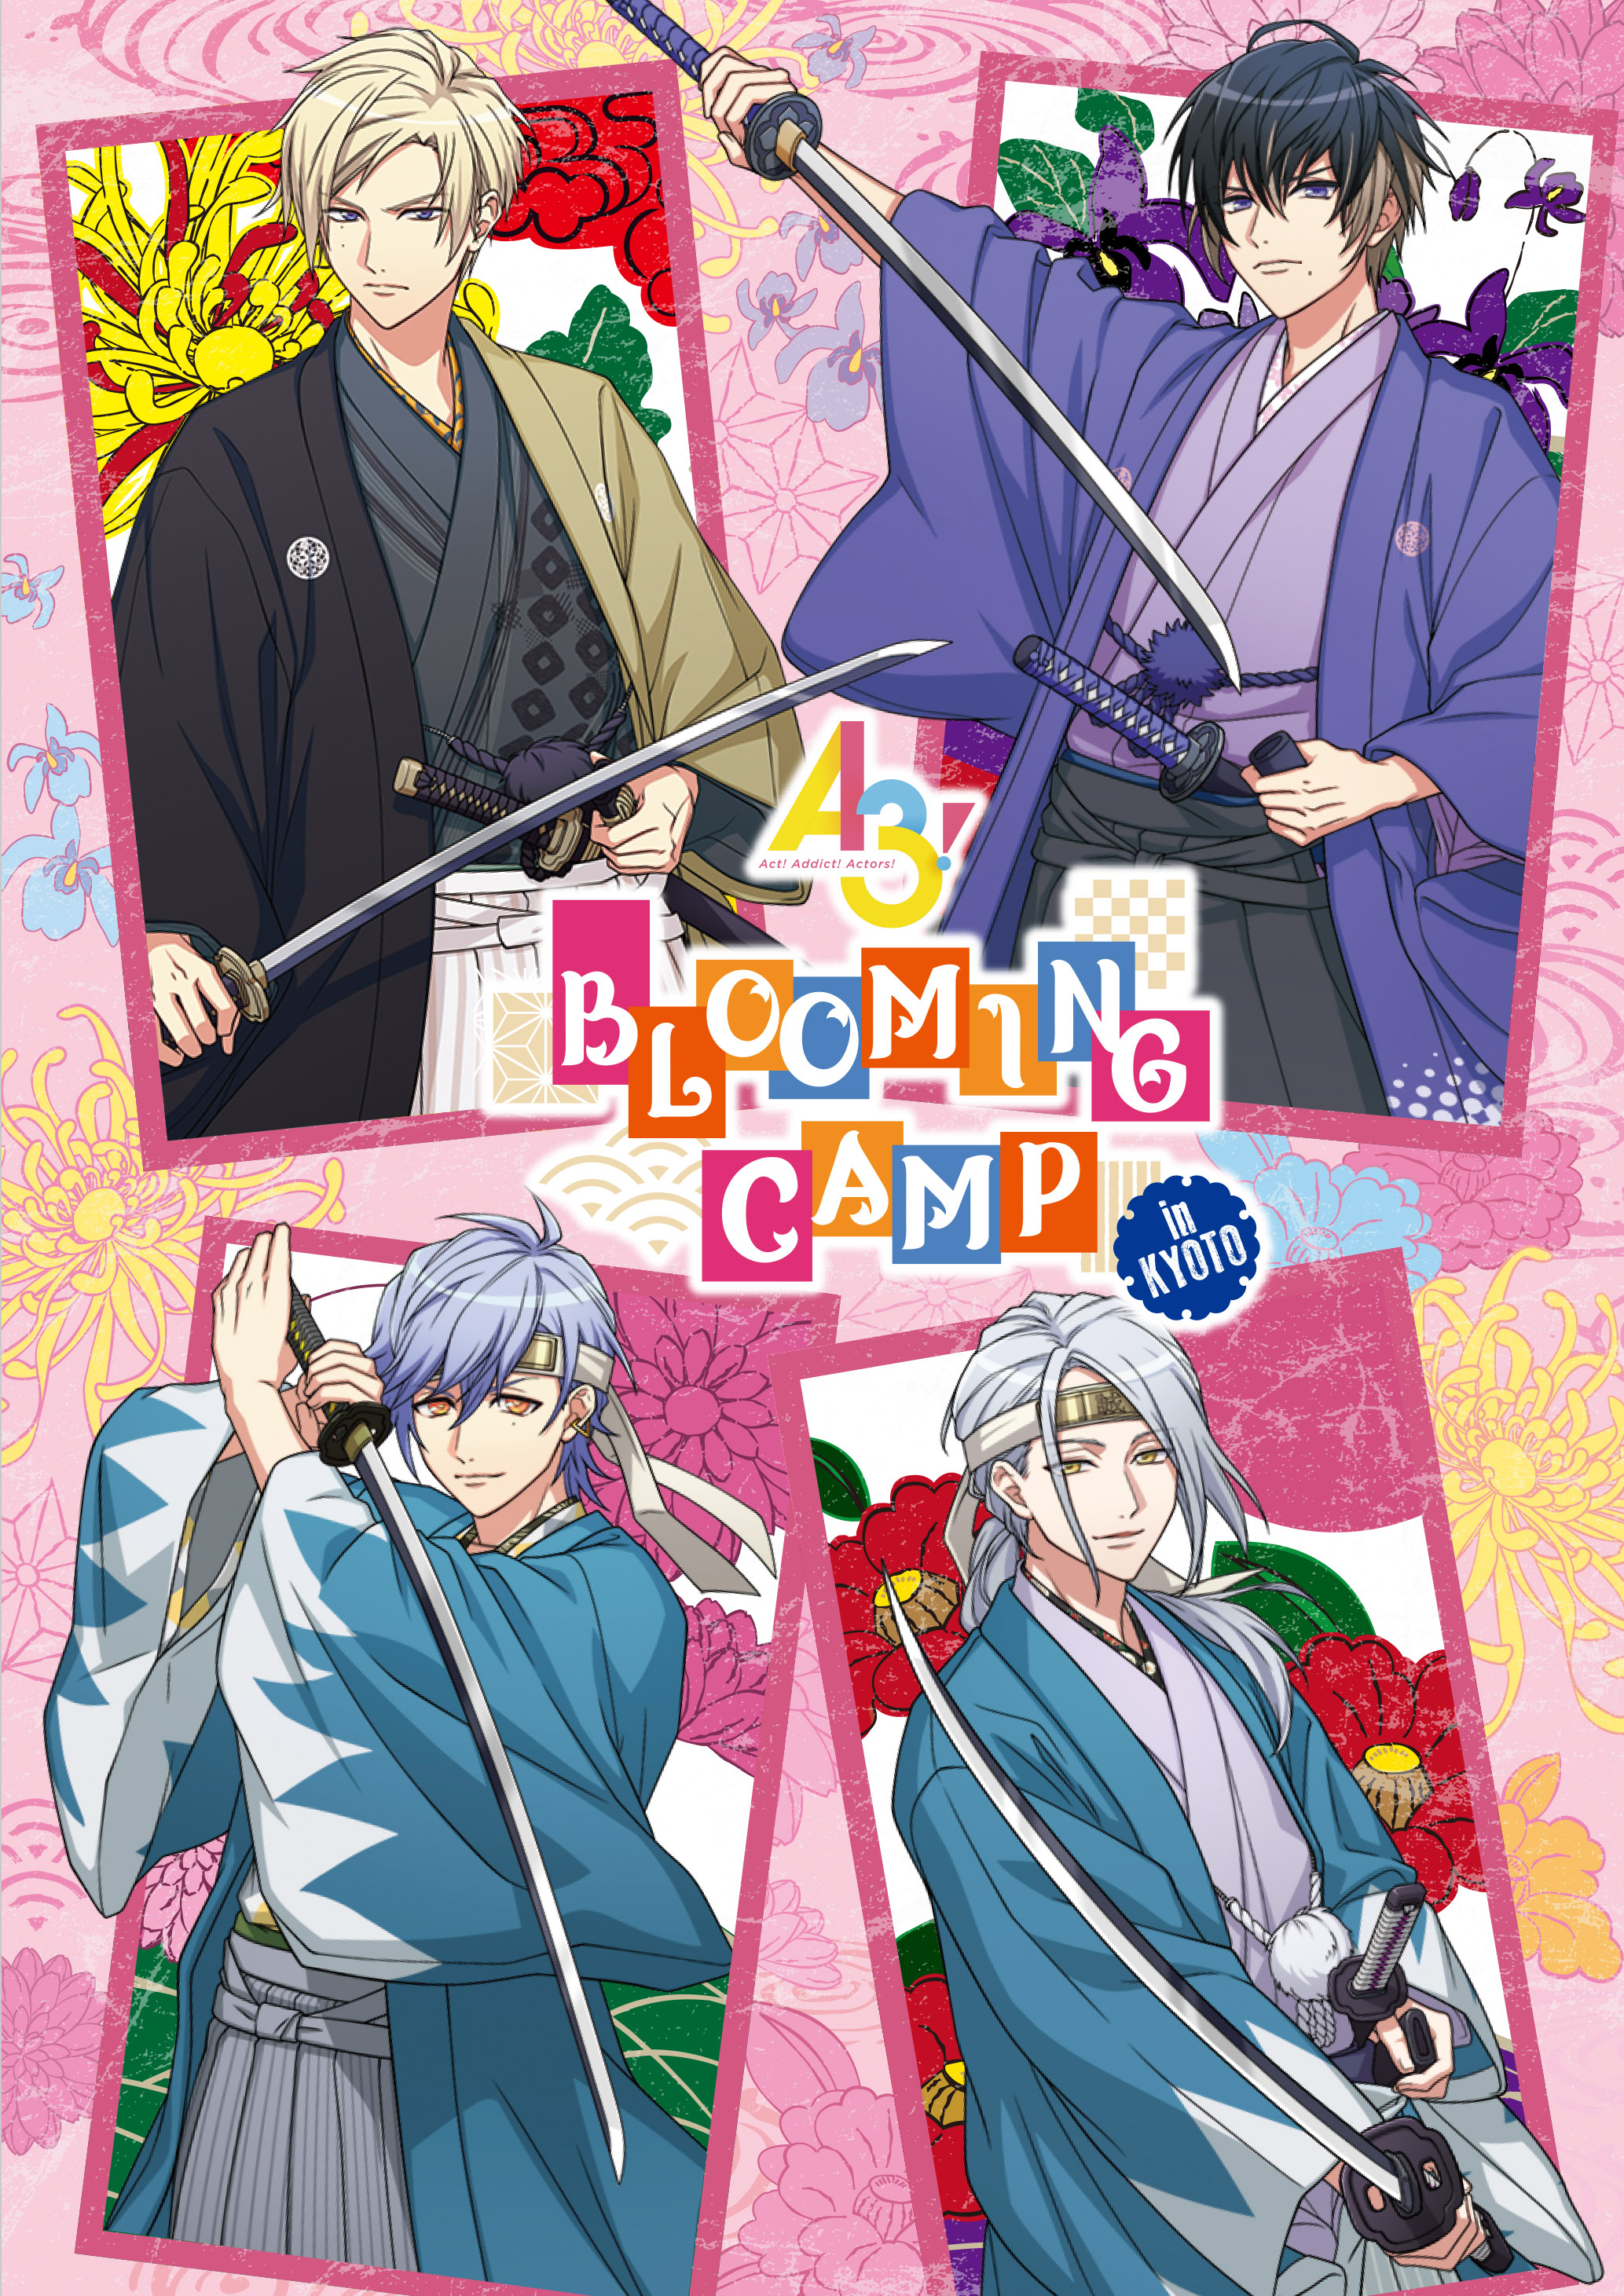 A3! BLOOMING CAMP in KYOTO